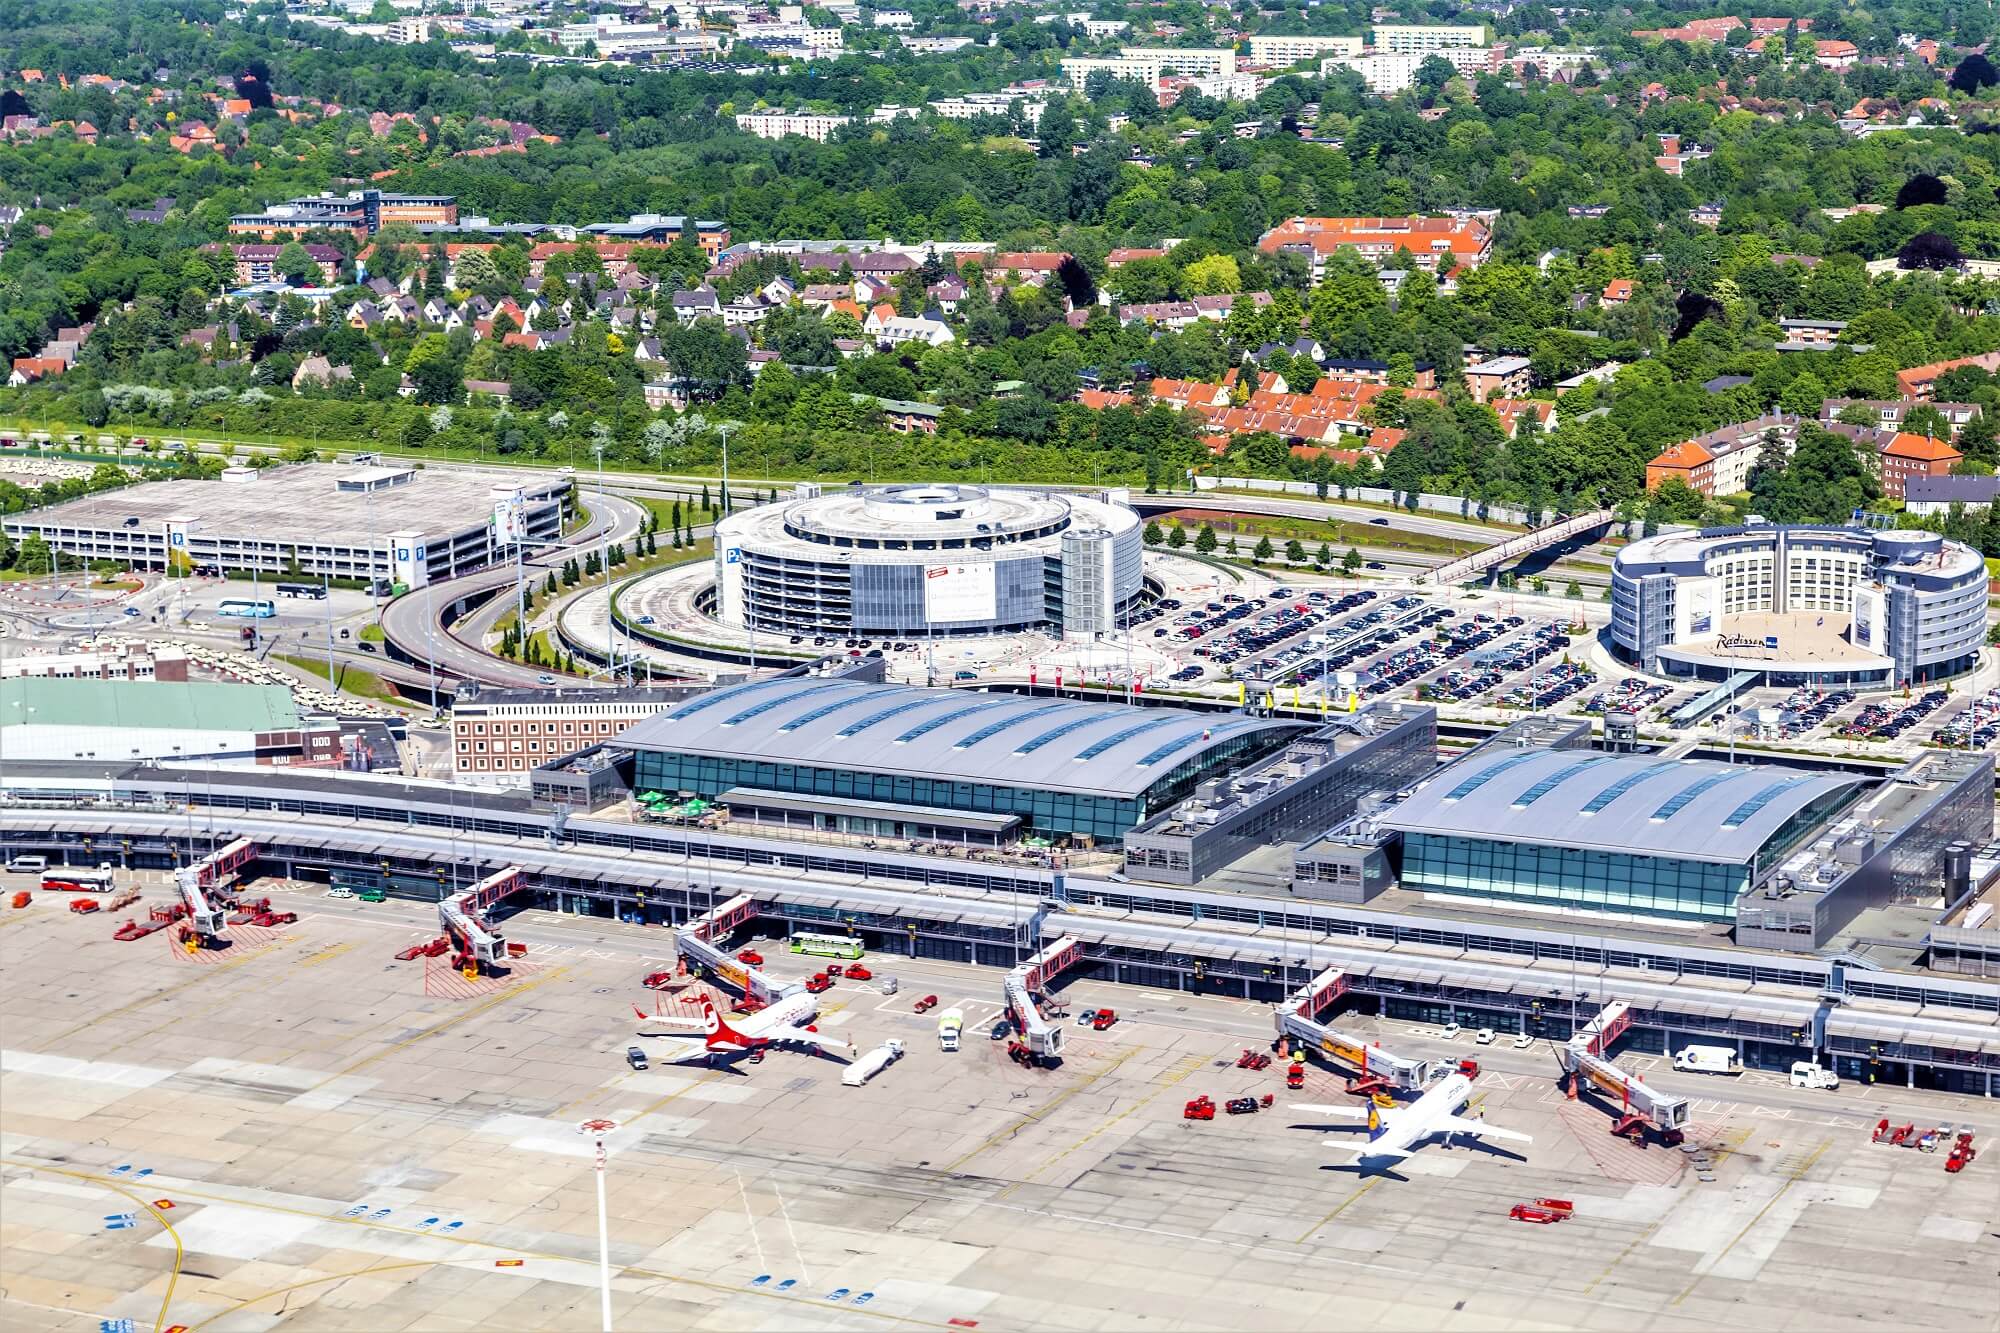 HAM airport in Germany